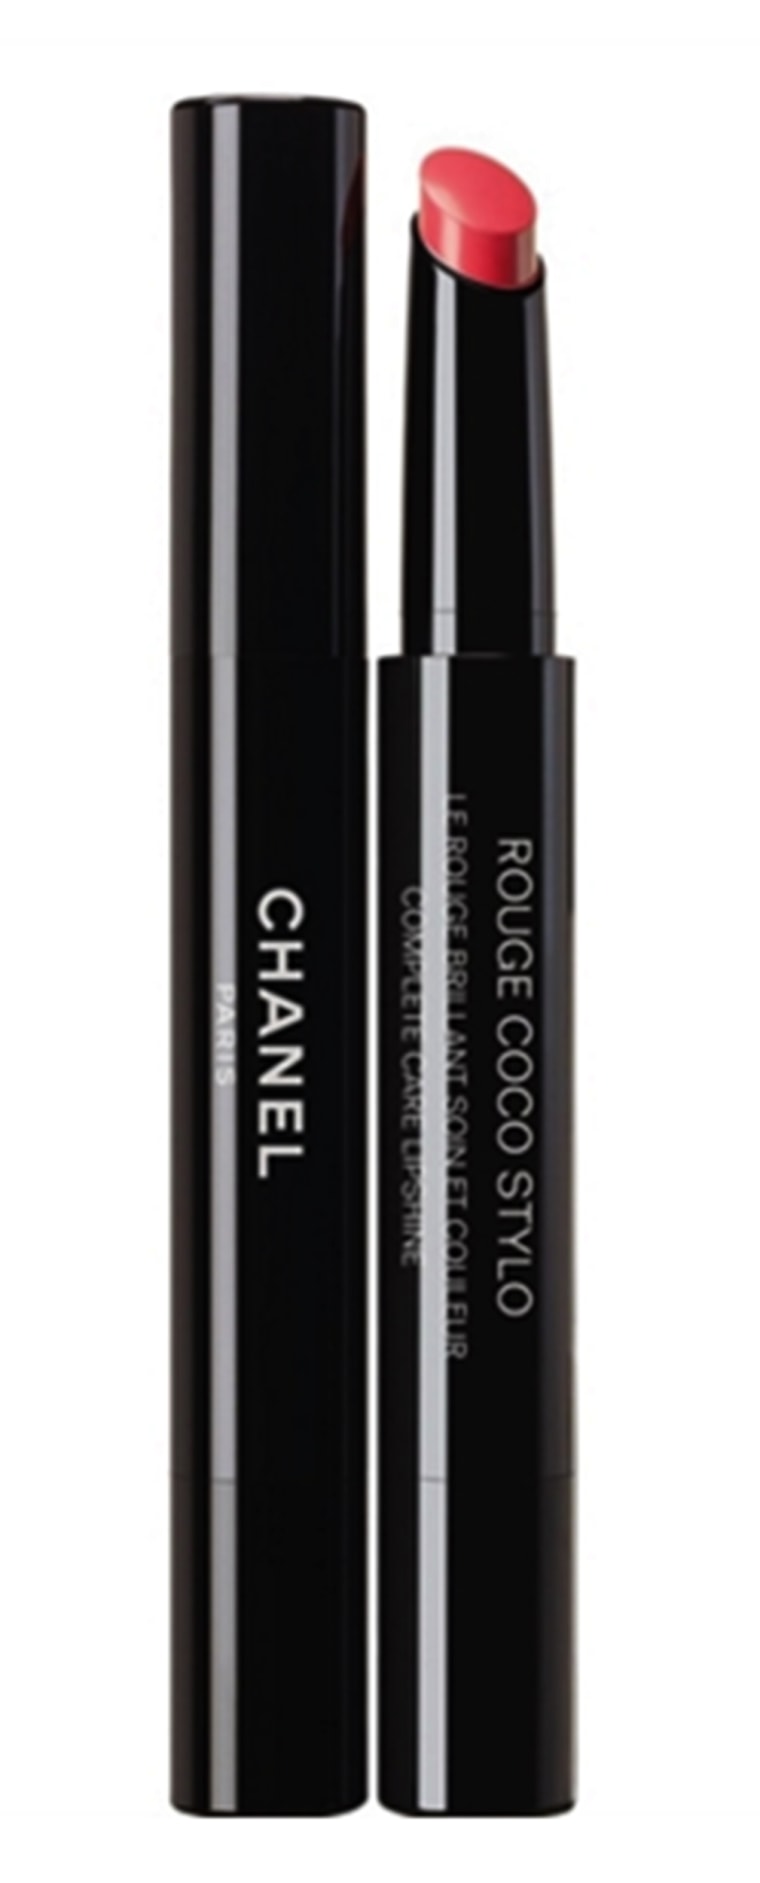 Chanel's Rouge Coco Stylo help's to smooth, plump and add sheen to your lips